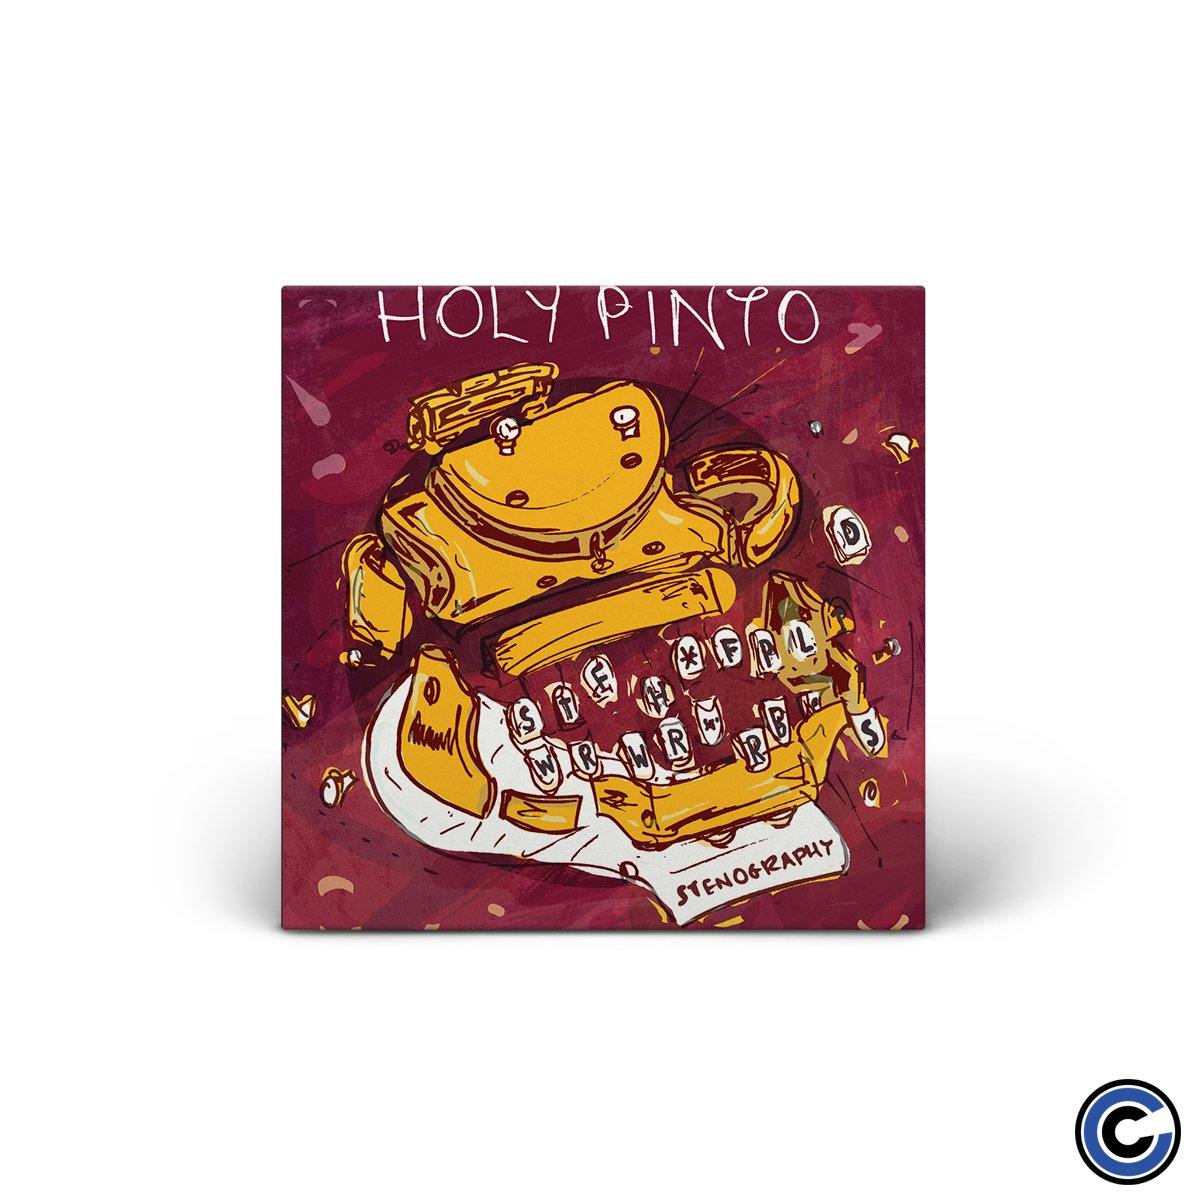 Buy – Holy Pinto "Stenography" 7" – Band & Music Merch – Cold Cuts Merch